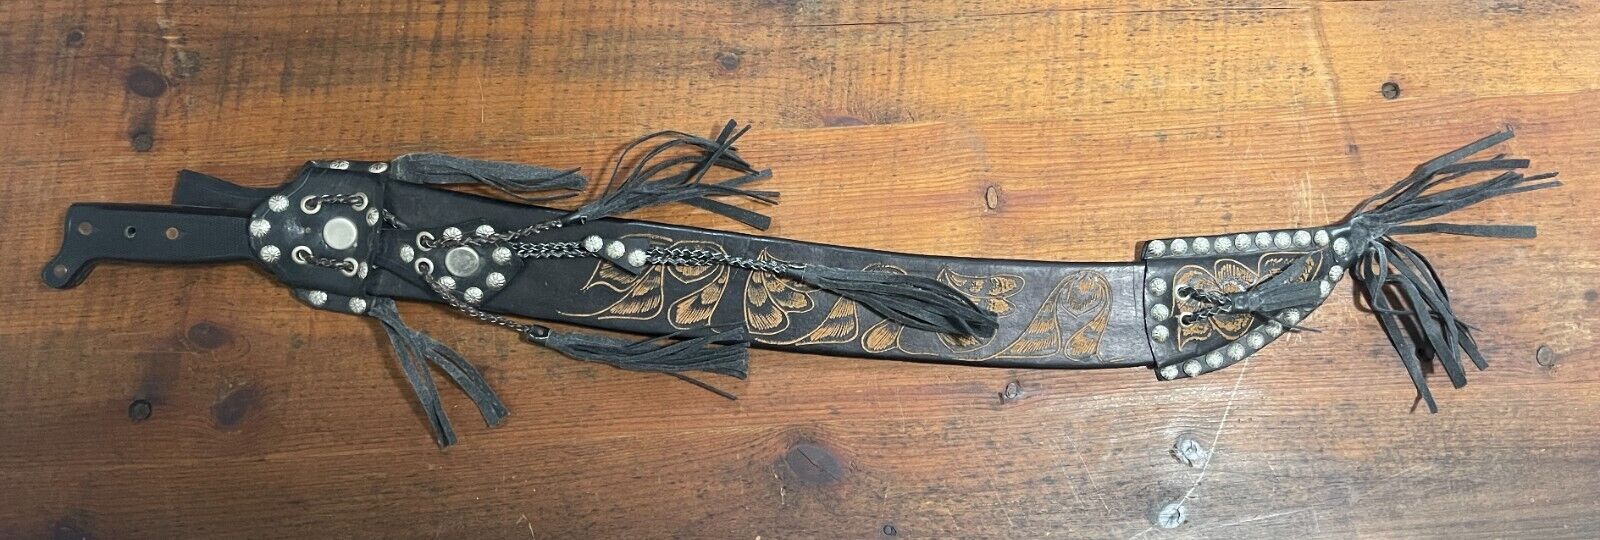 24” Machete with Decorated Leather Sheath from Guatamala - 1990’s